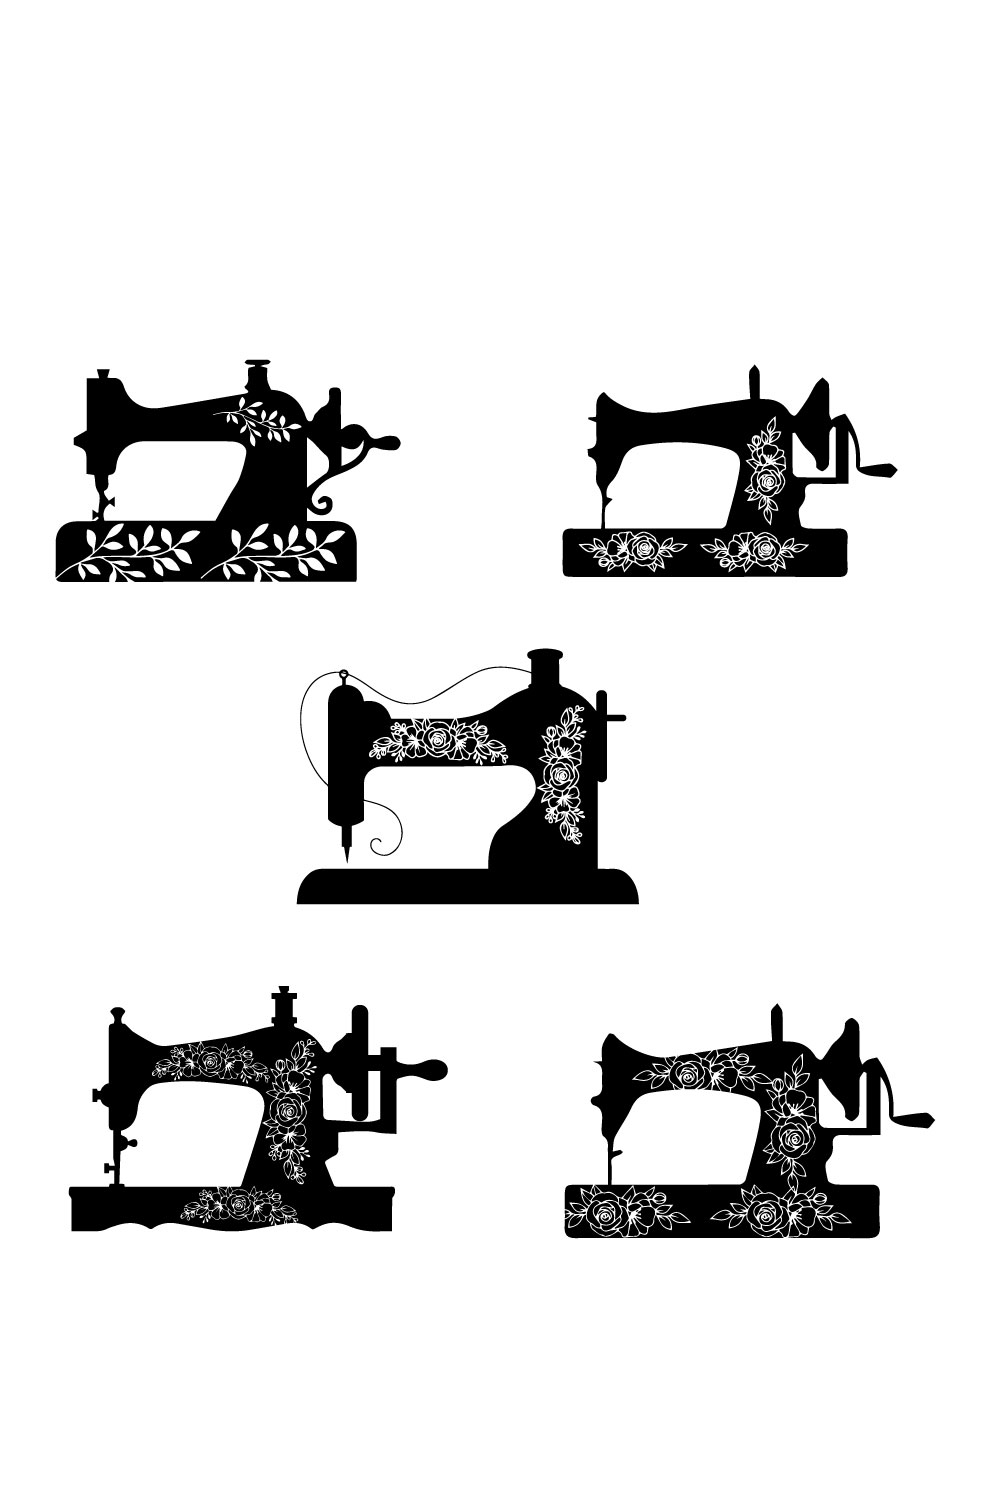 A selection of adorable images of sewing machine silhouettes